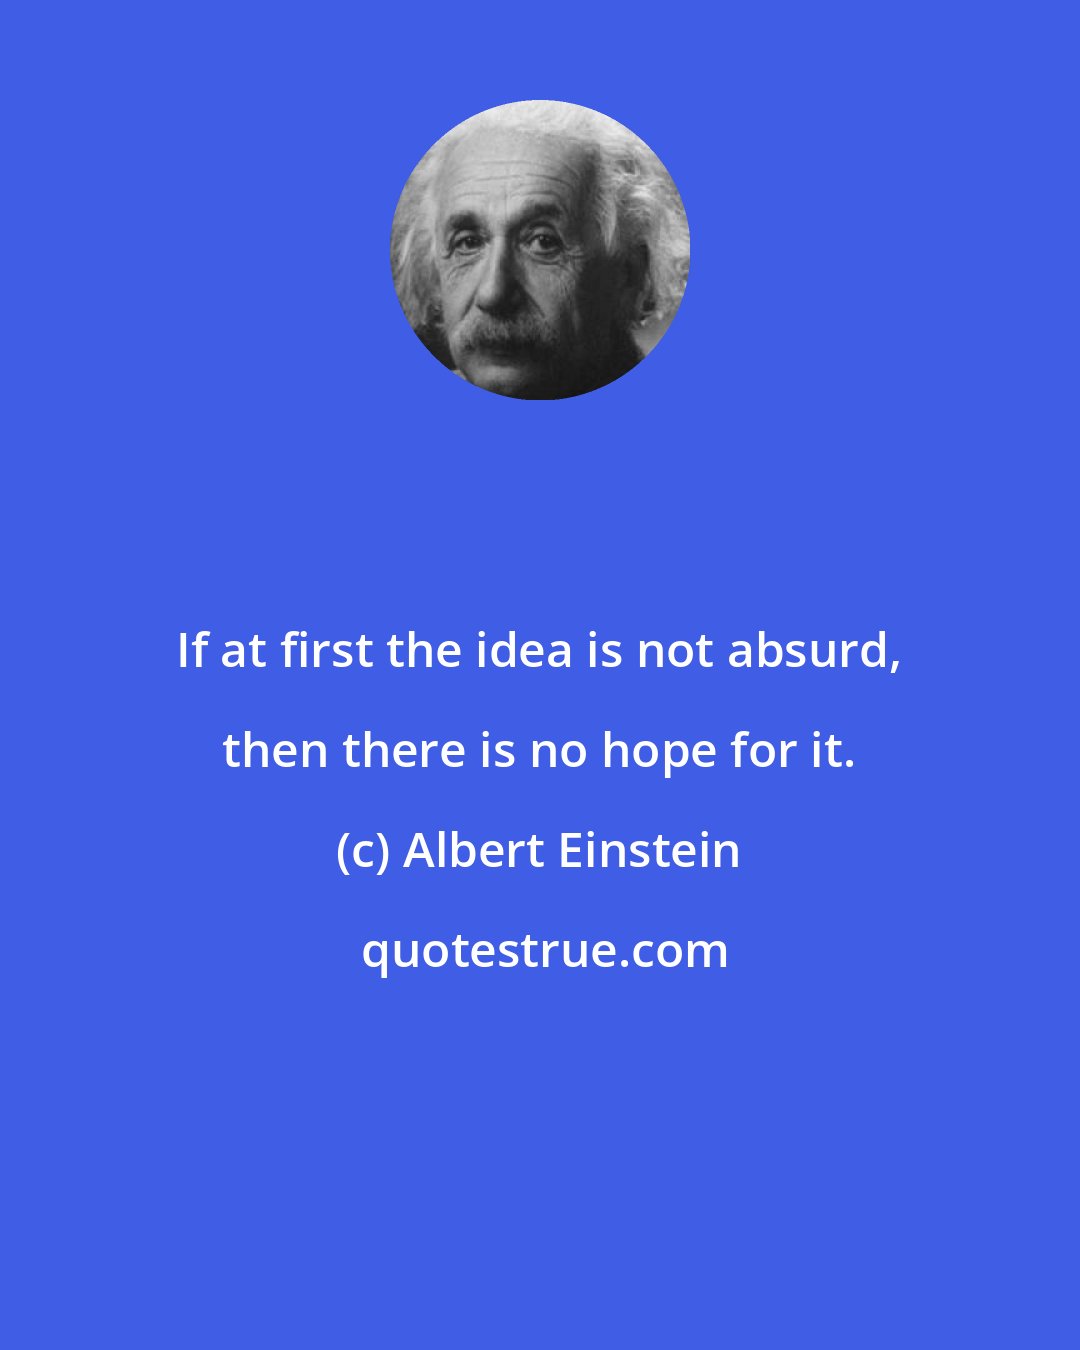 Albert Einstein: If at first the idea is not absurd, then there is no hope for it.